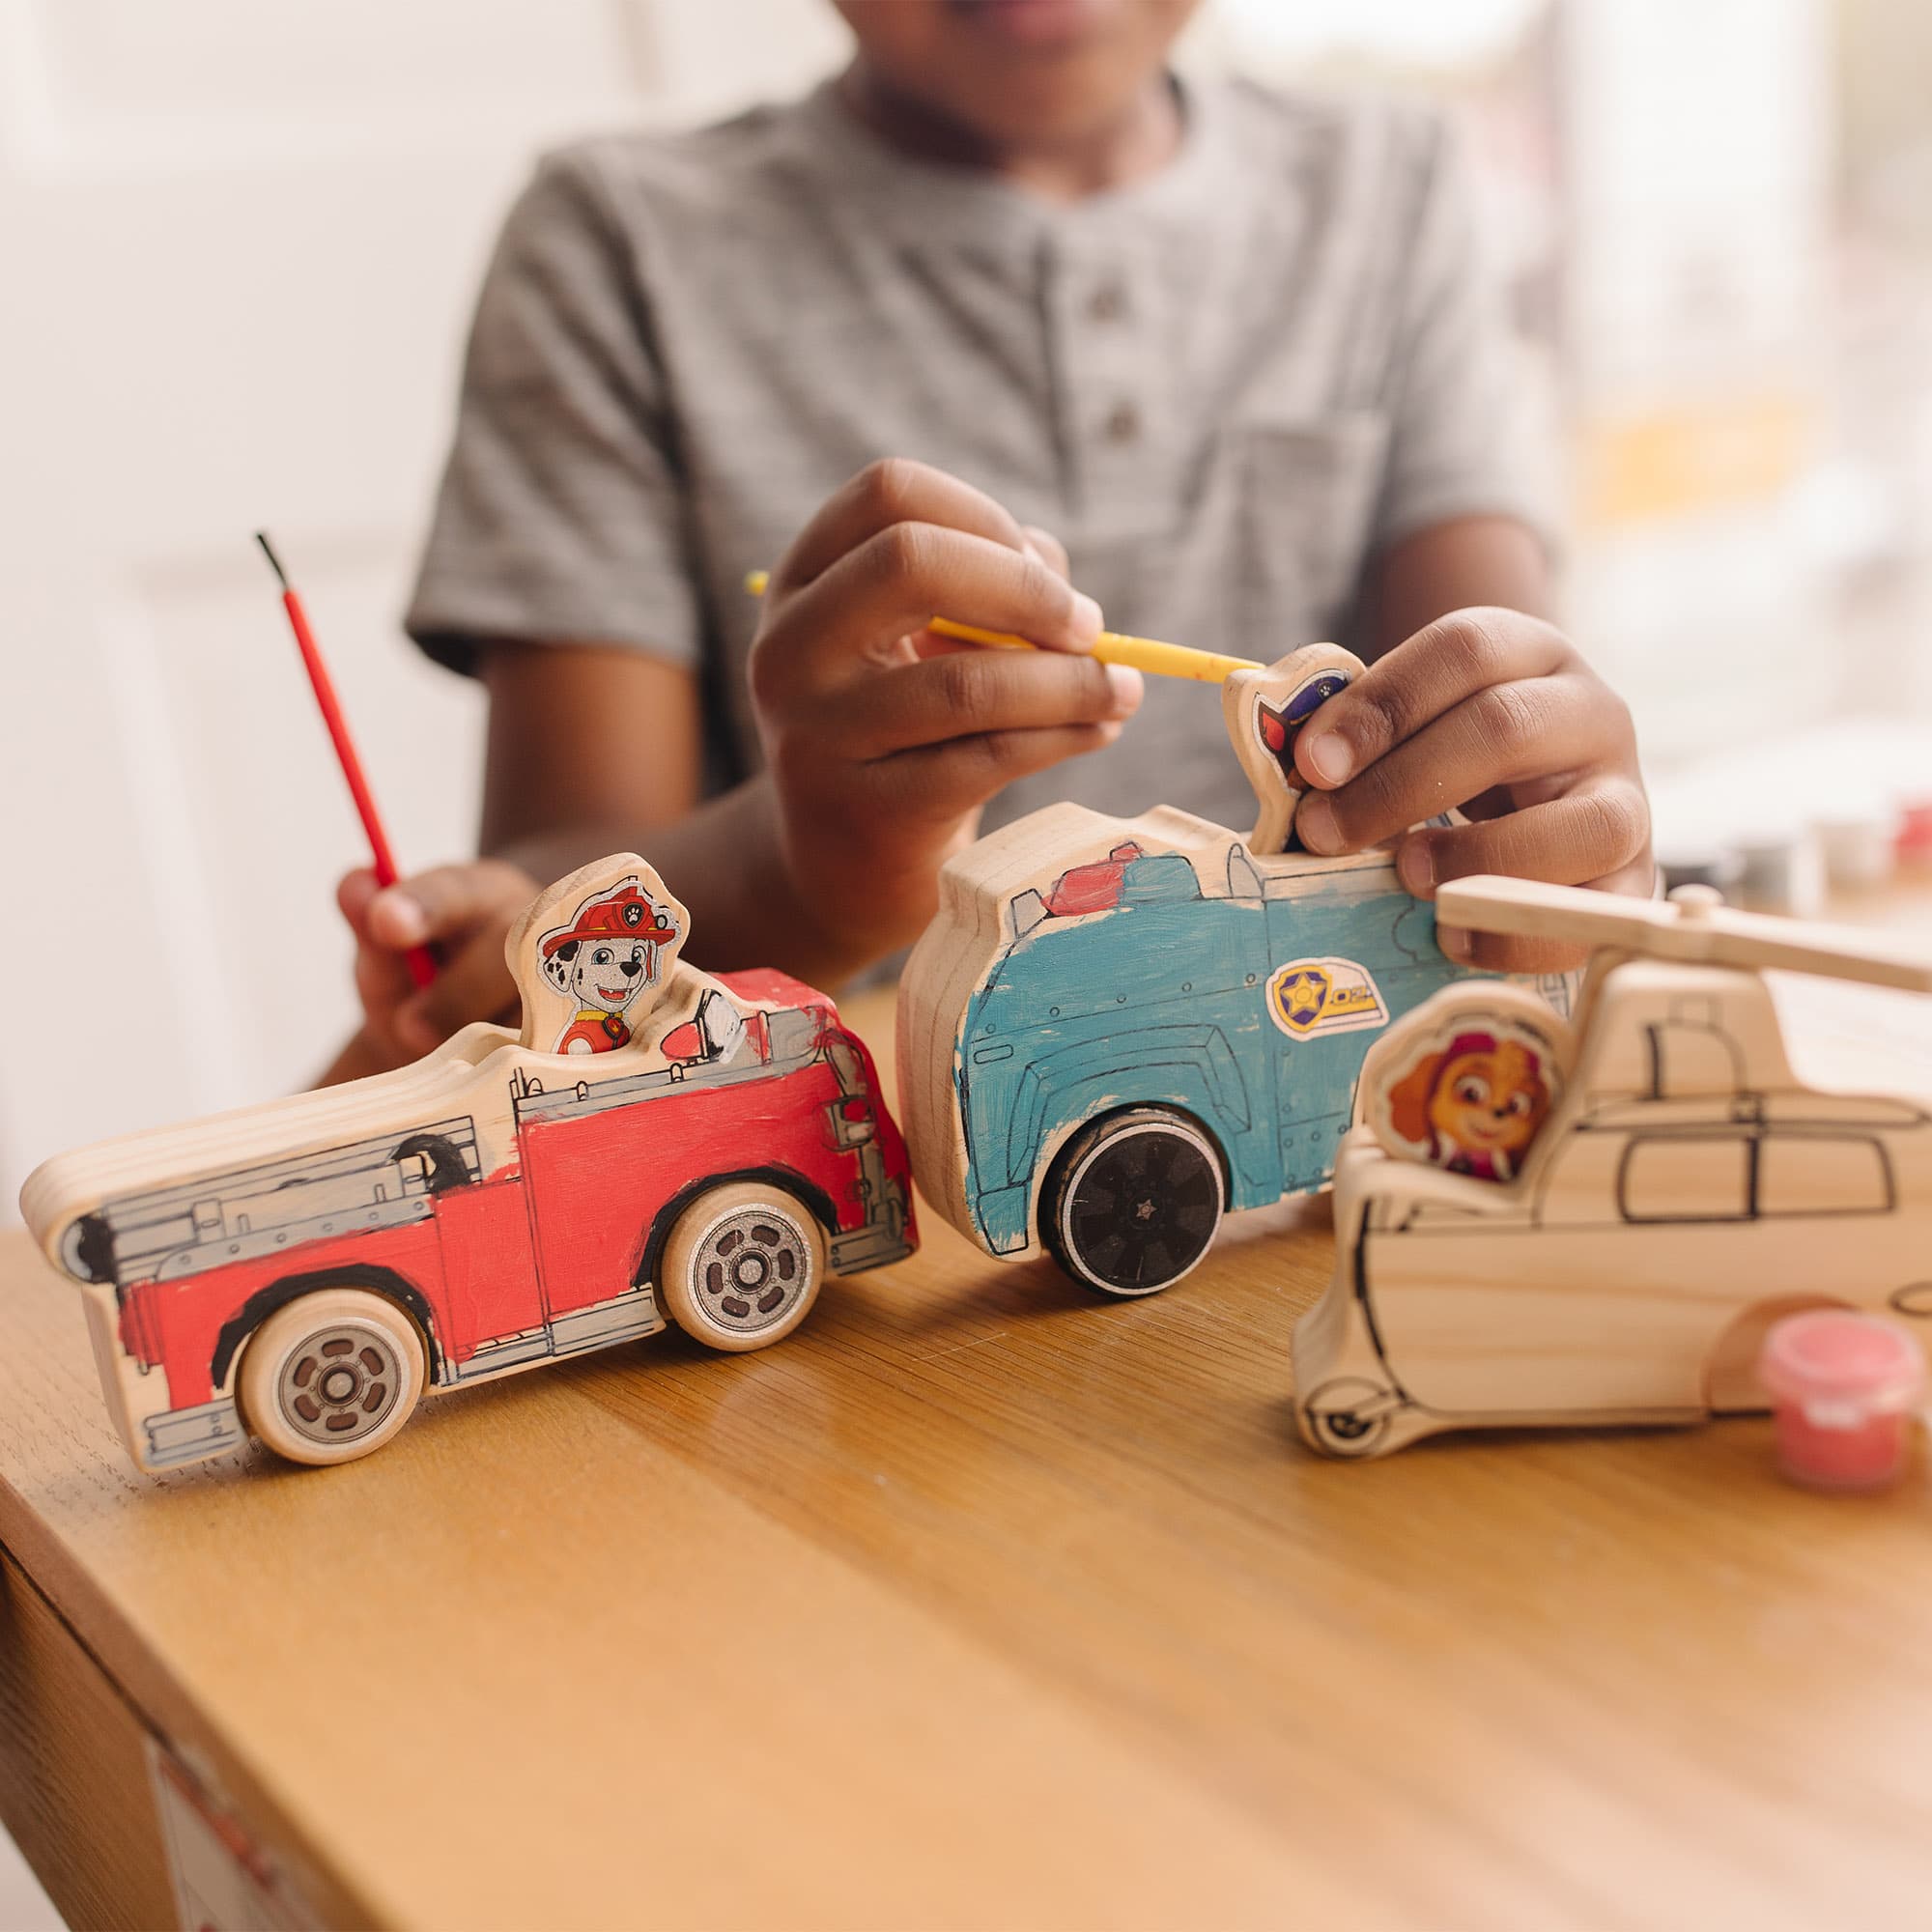 Melissa & Doug Wooden Vehicles and Traffic Signs With 6 Cars 9 Handcrafted Toys for sale online 